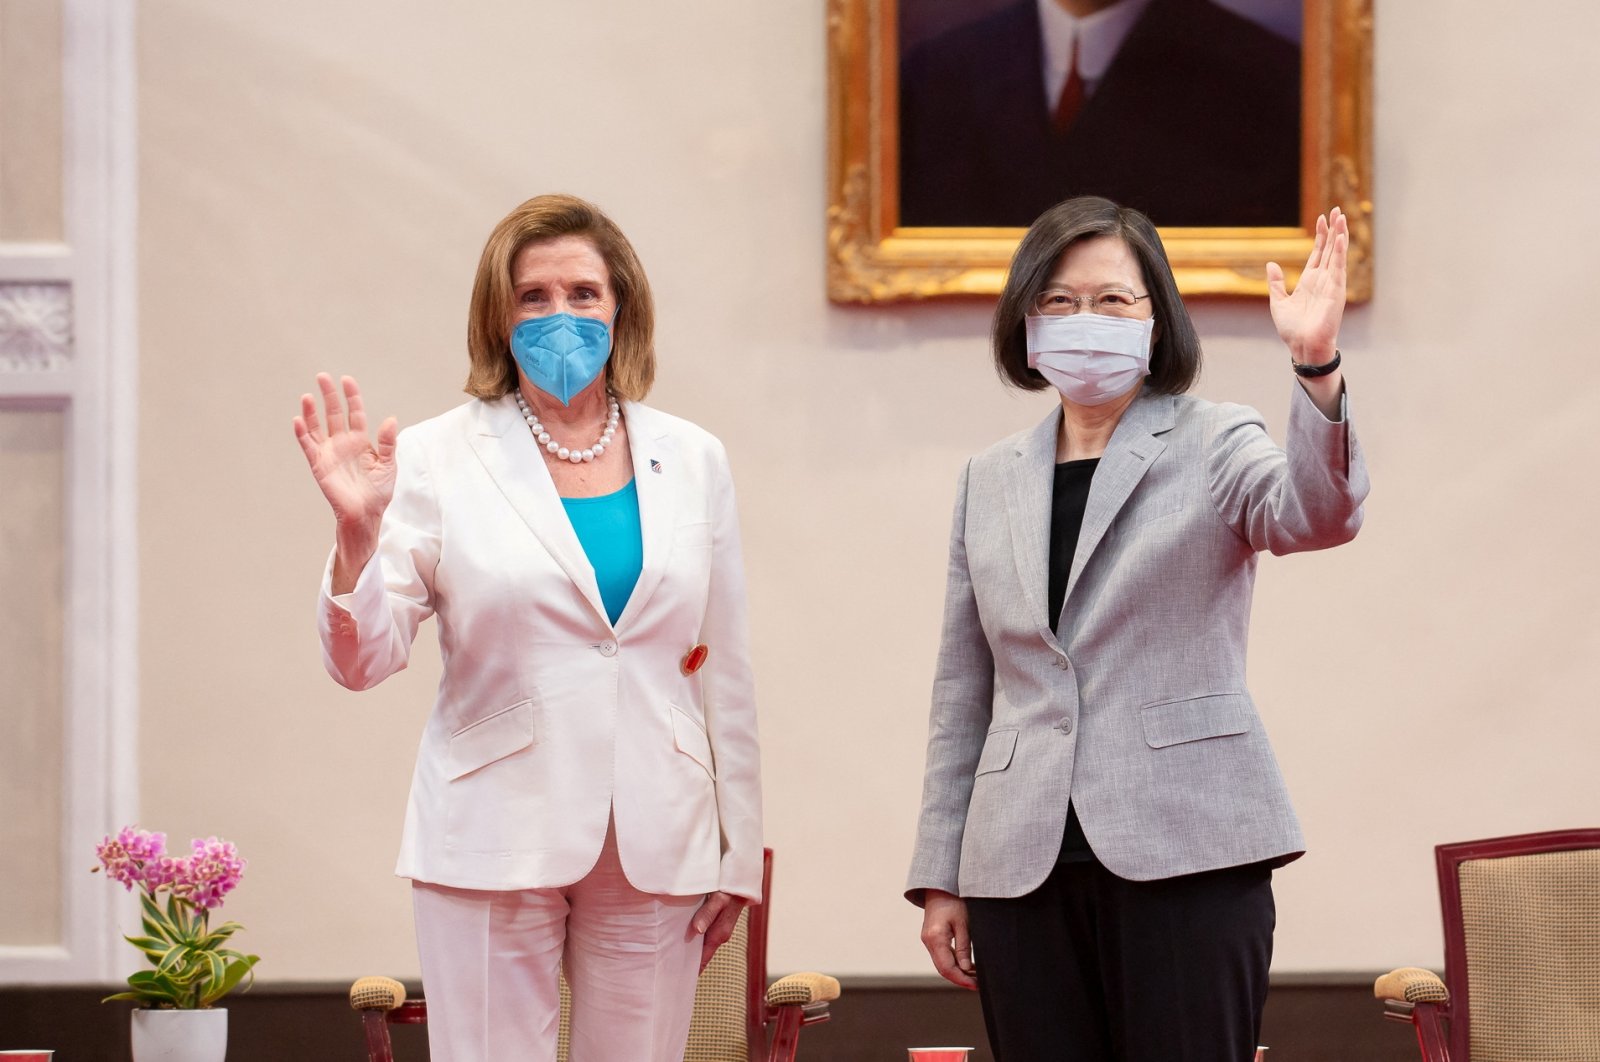 U.S. House Speaker Nancy Pelosi attends a meeting with Taiwan President Tsai Ing-wen at the presidential office in Taipei, Taiwan, Aug. 3, 2022. (Taiwan Presidential Office via Reuters)